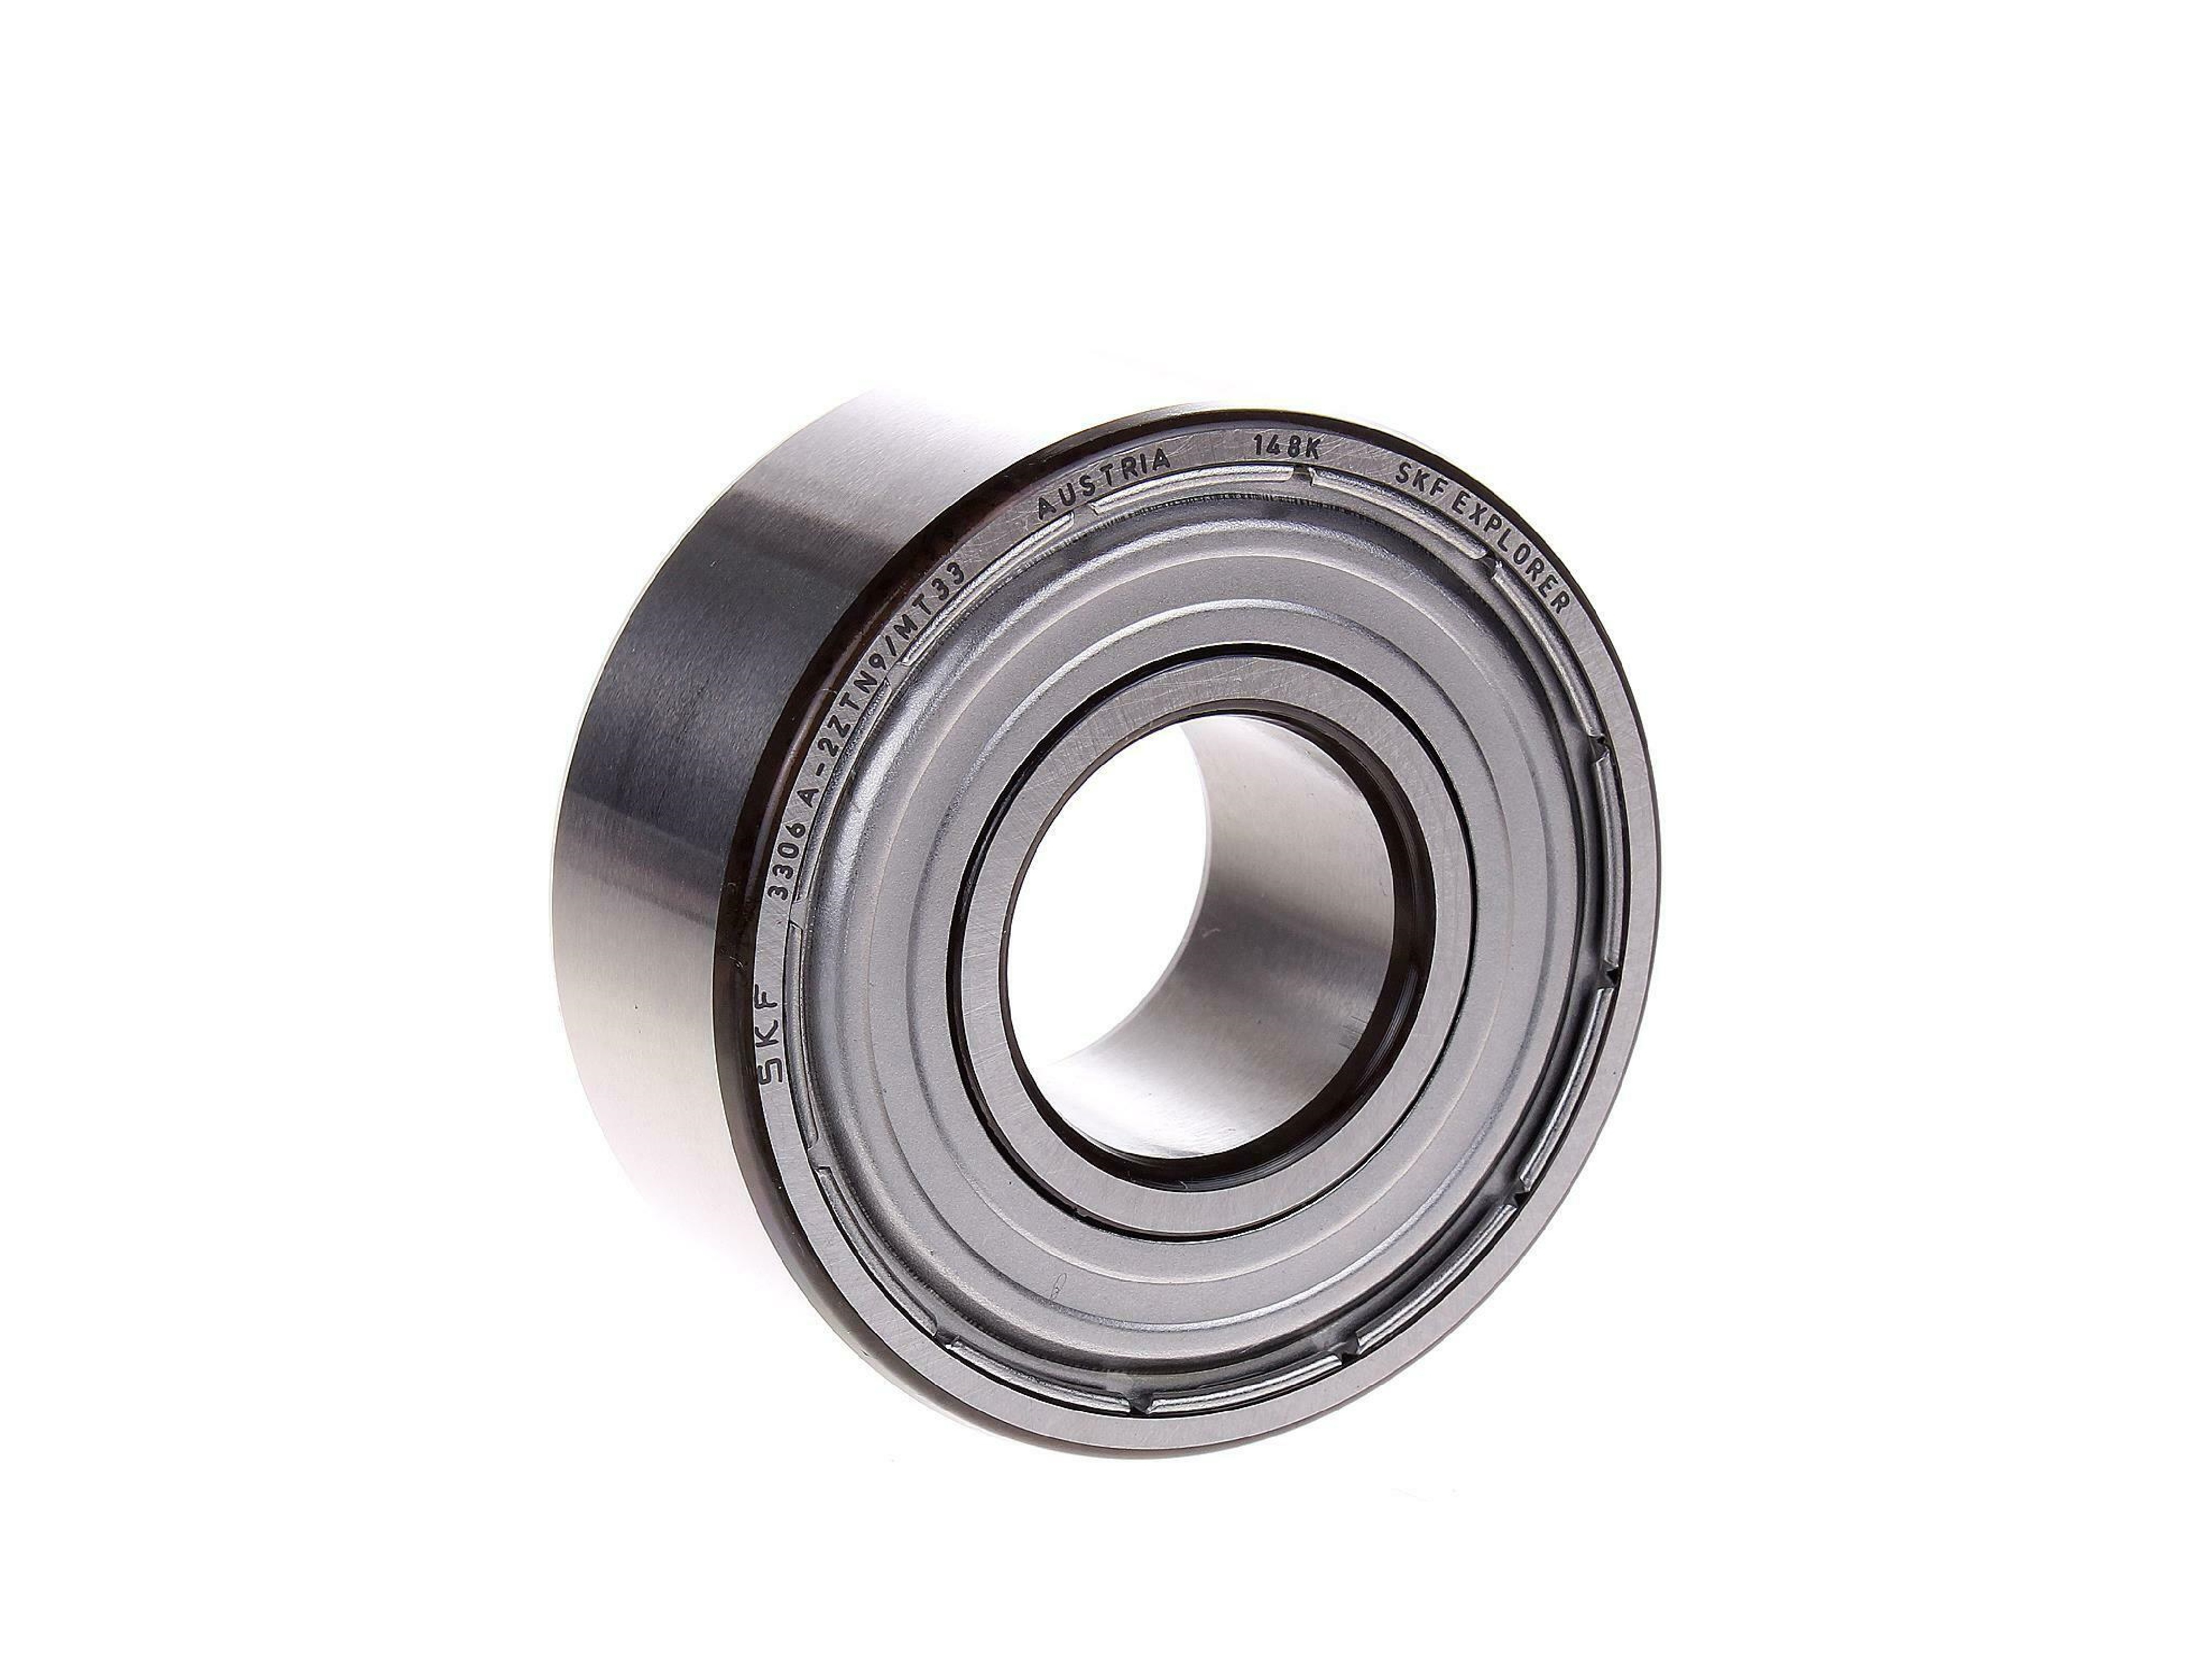 3304A-2ZTN9/MT33 SKF Double Row Angular Contact Ball Bearing - Shielded 20mm x 52mm x 22.2mm